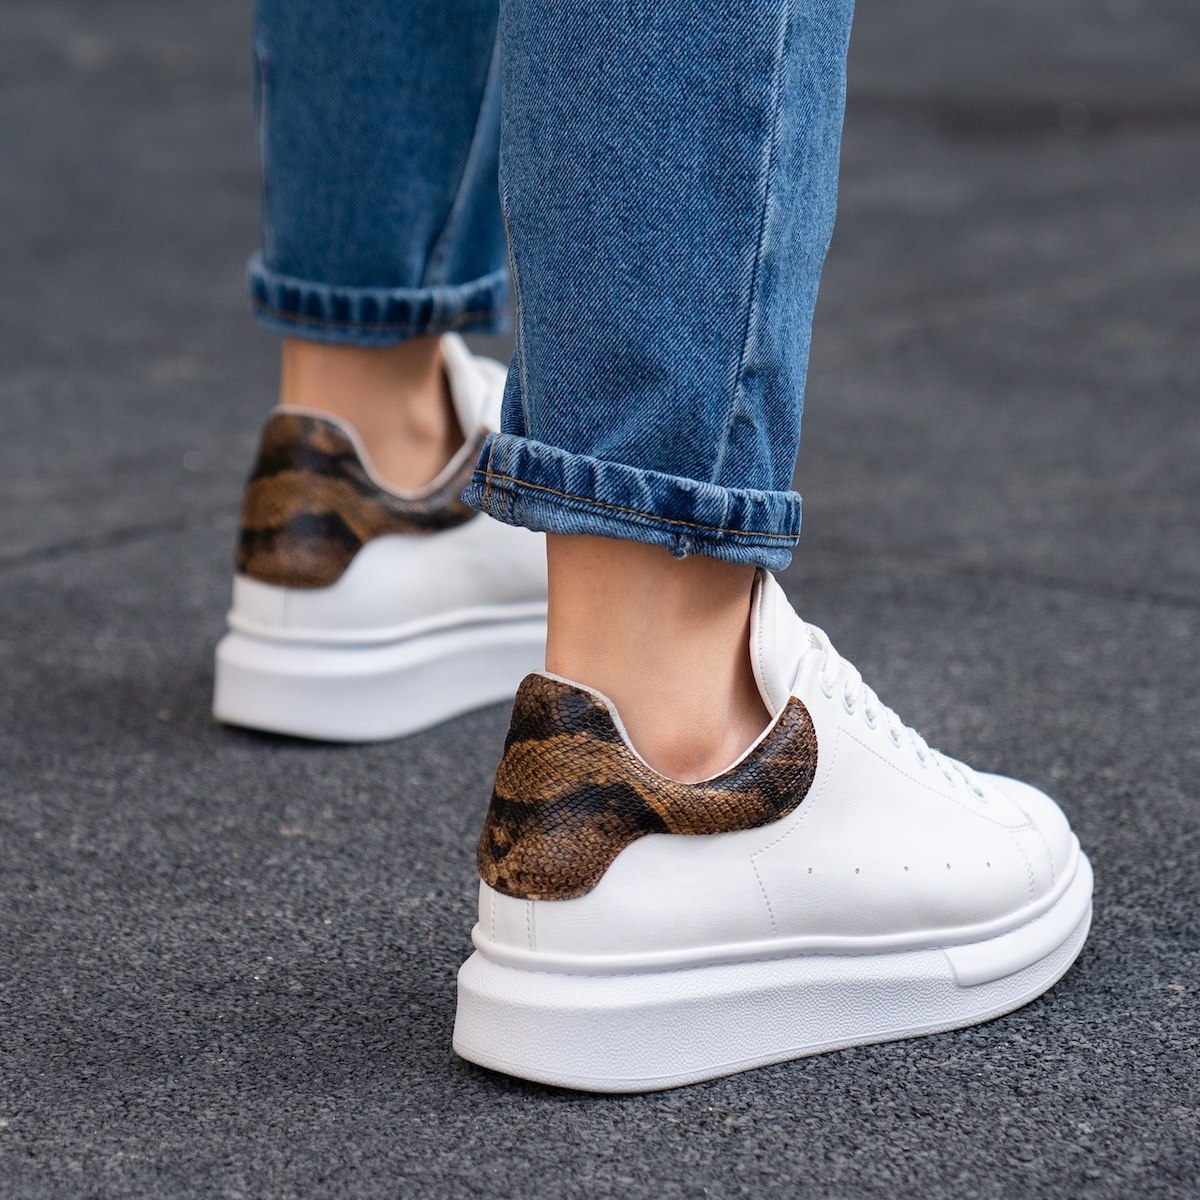 Women’s Chunky Sneakers with Crown in White and Snake Skin | Martin Valen